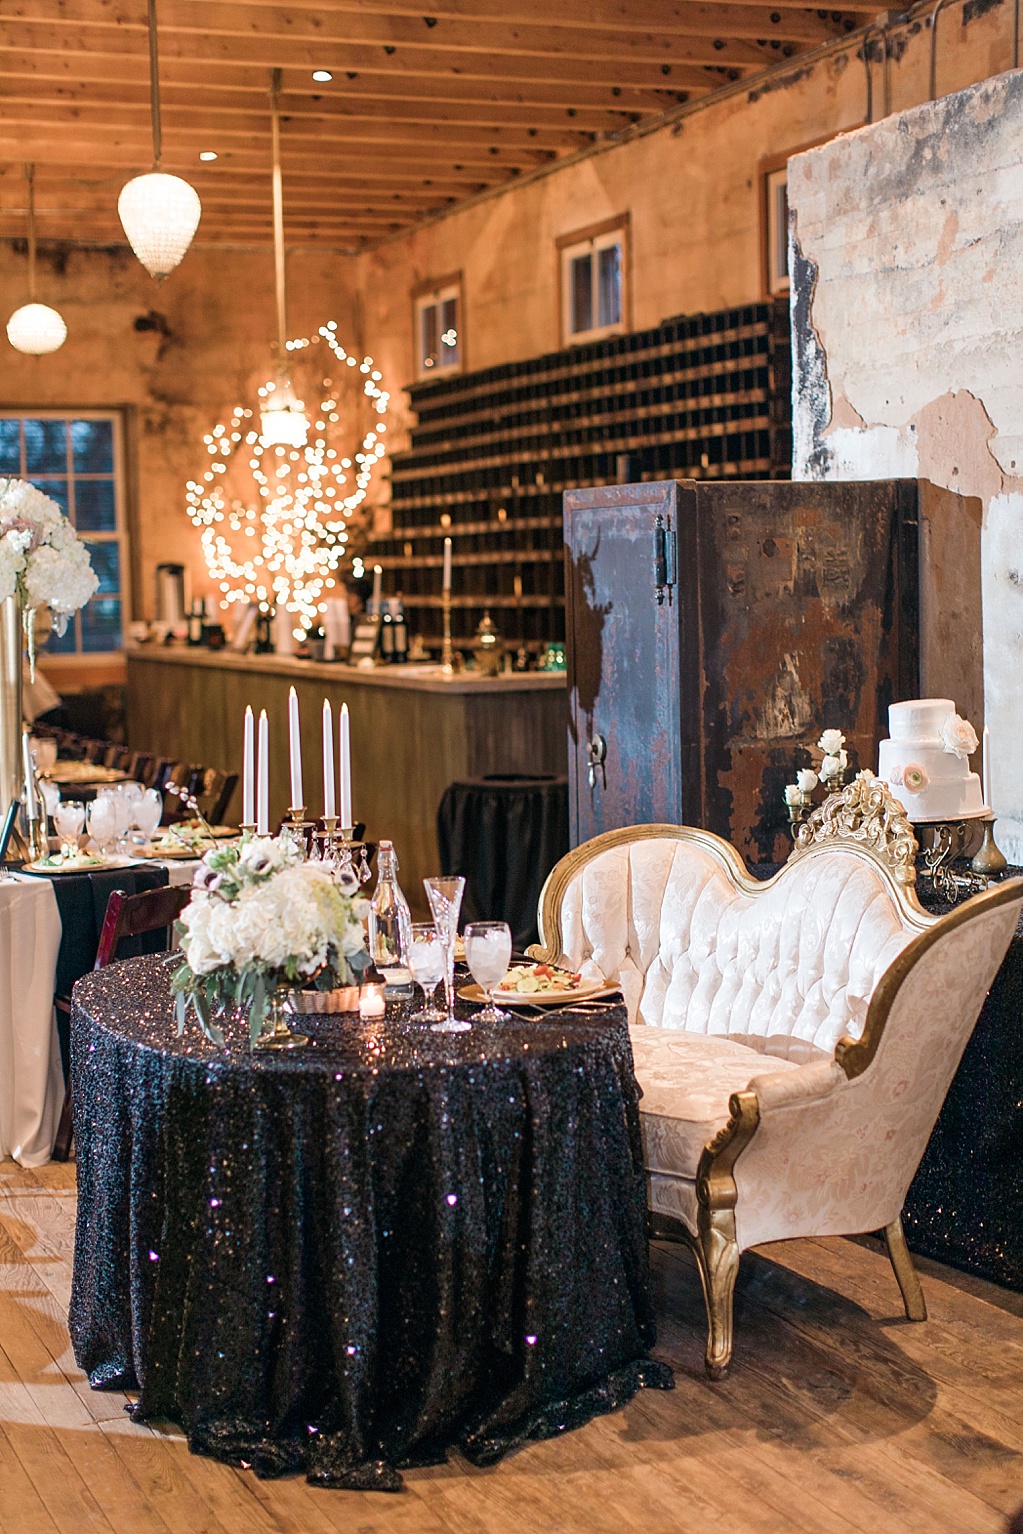 An Art Deco Black Tie Wedding at The Ingenhuett On High in Comfort Texas Featuring a Bentley Vintage Car and Blush Wedding Dress 0113